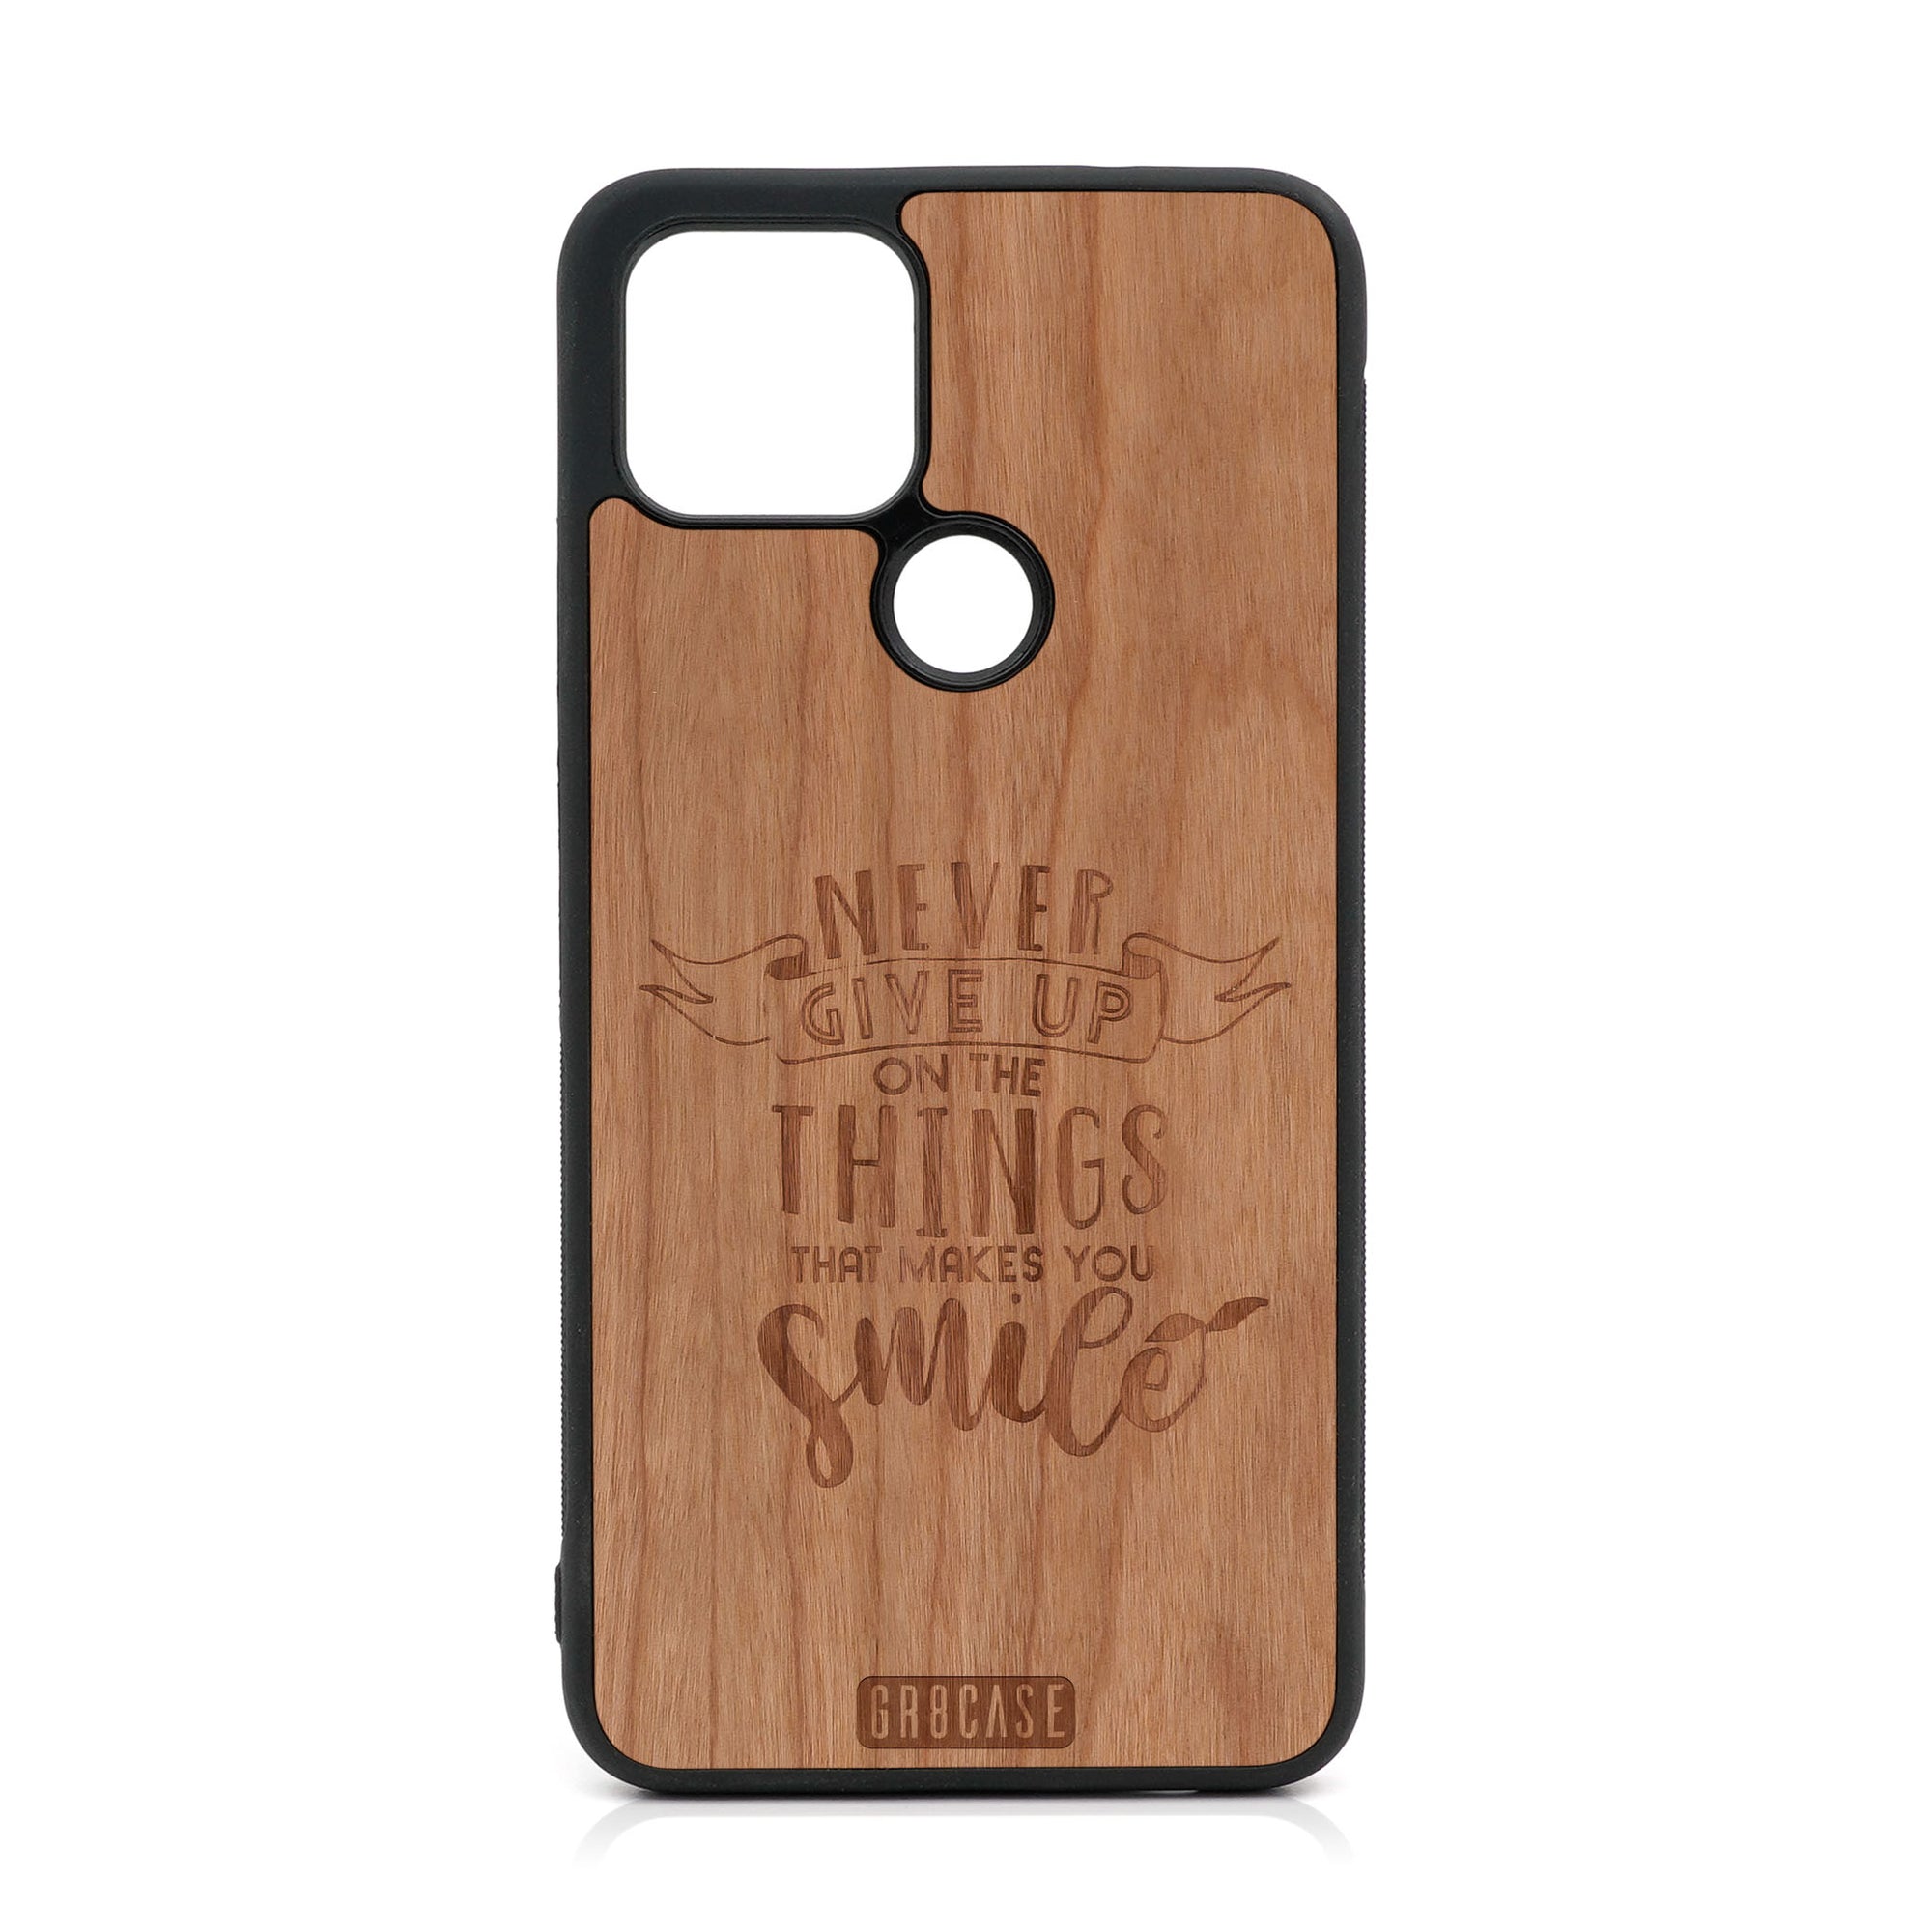 Never Give Up On The Things That Make You Smile Design Wood Case For Google Pixel 5 XL/4A 5G